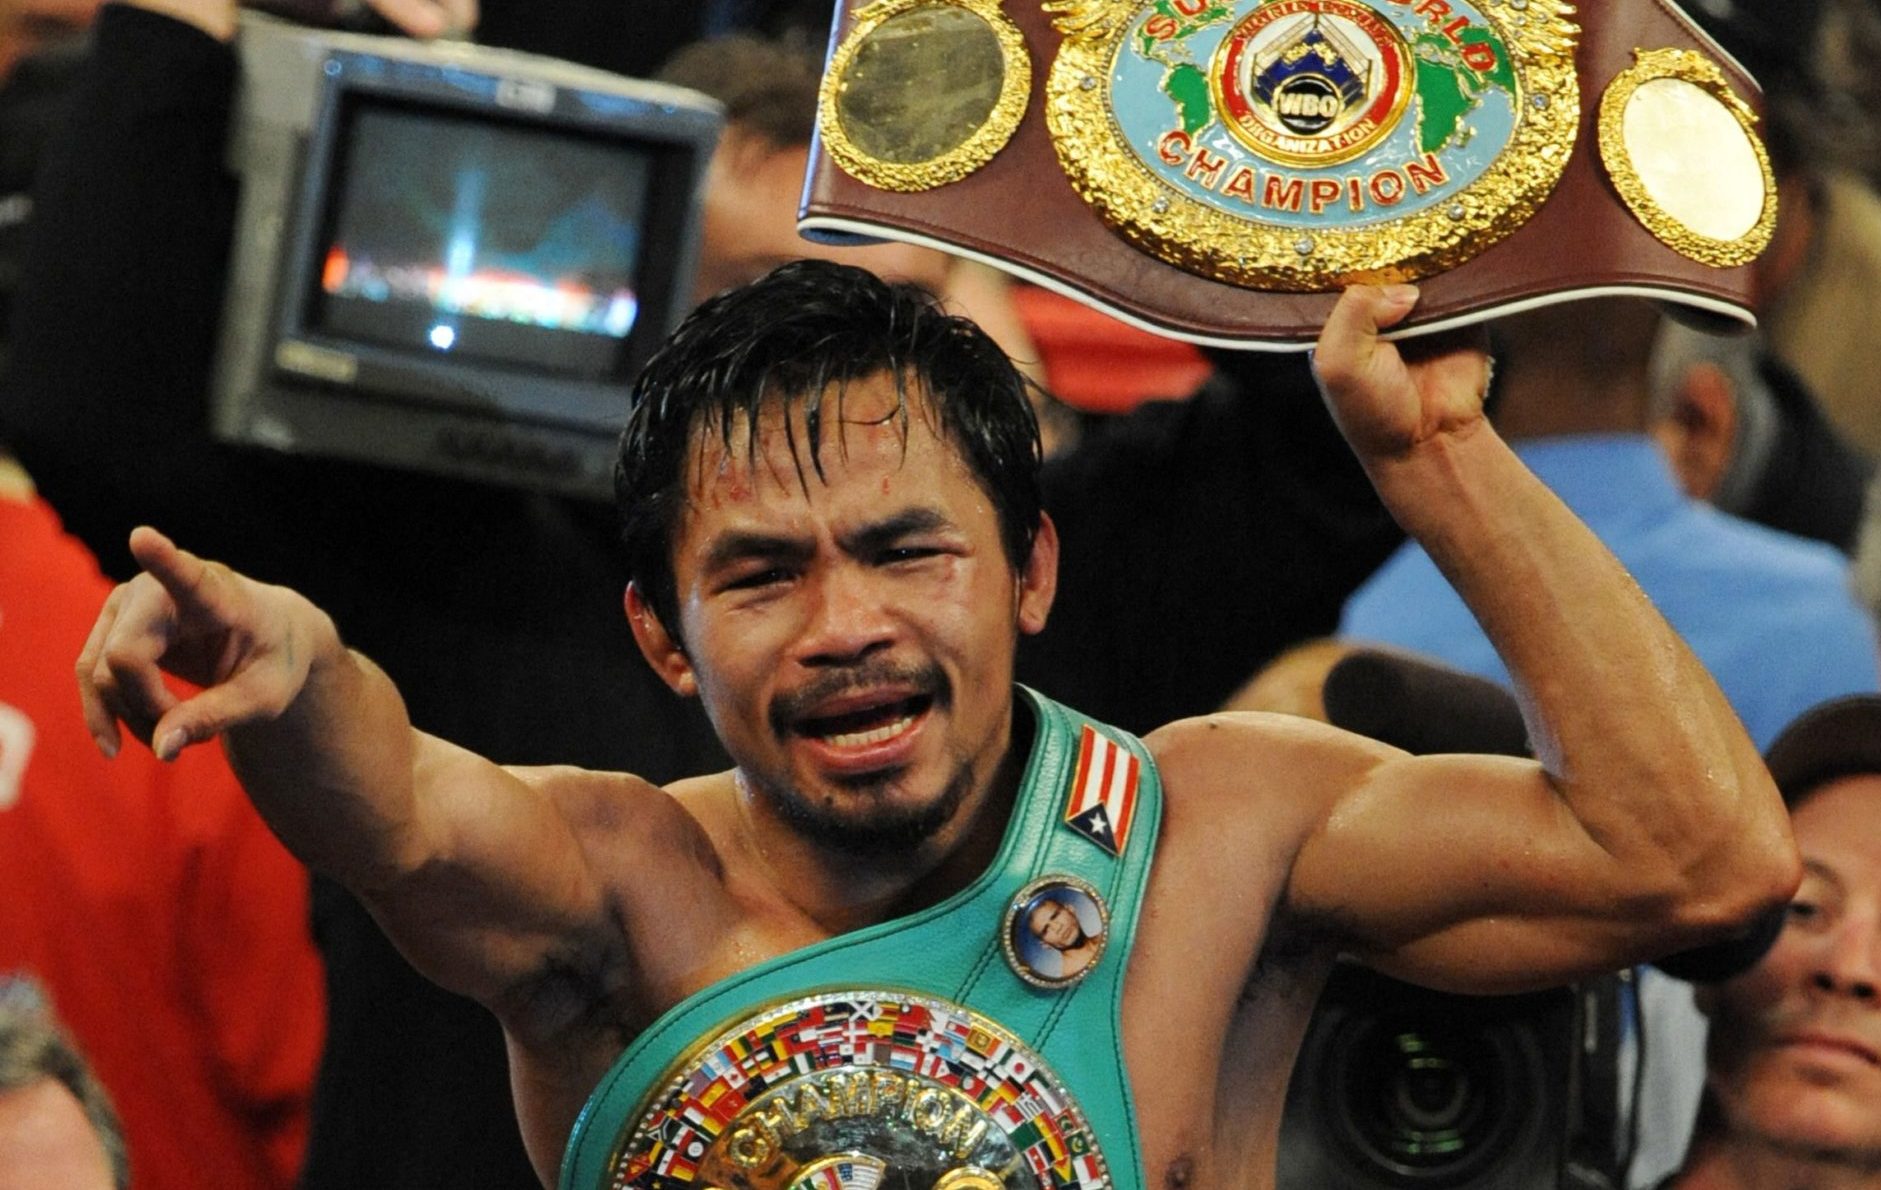 How Manny Pacquiao Wins While Referee Carlos Padilla Is Dishonest